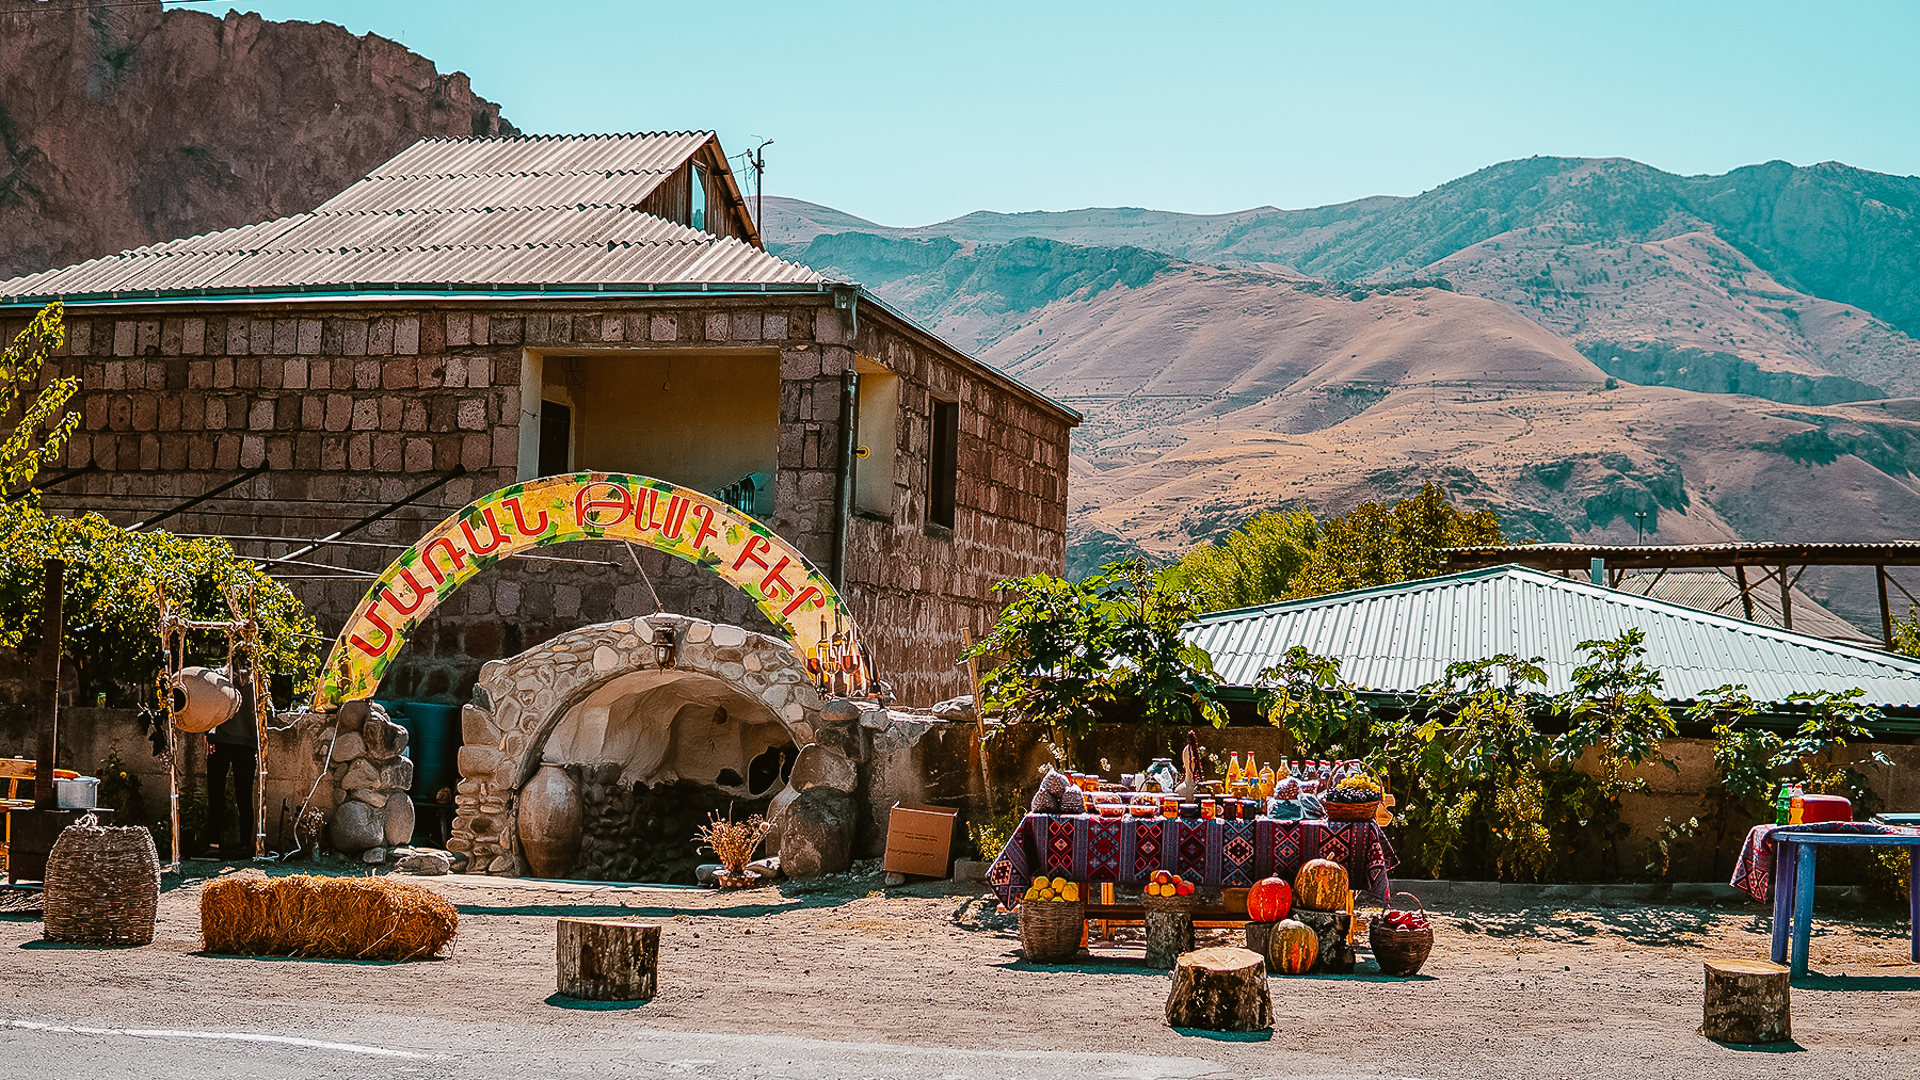 View of a Winery in Areni, Armenia, with mountains in the background and stalls with homemade products in the front.